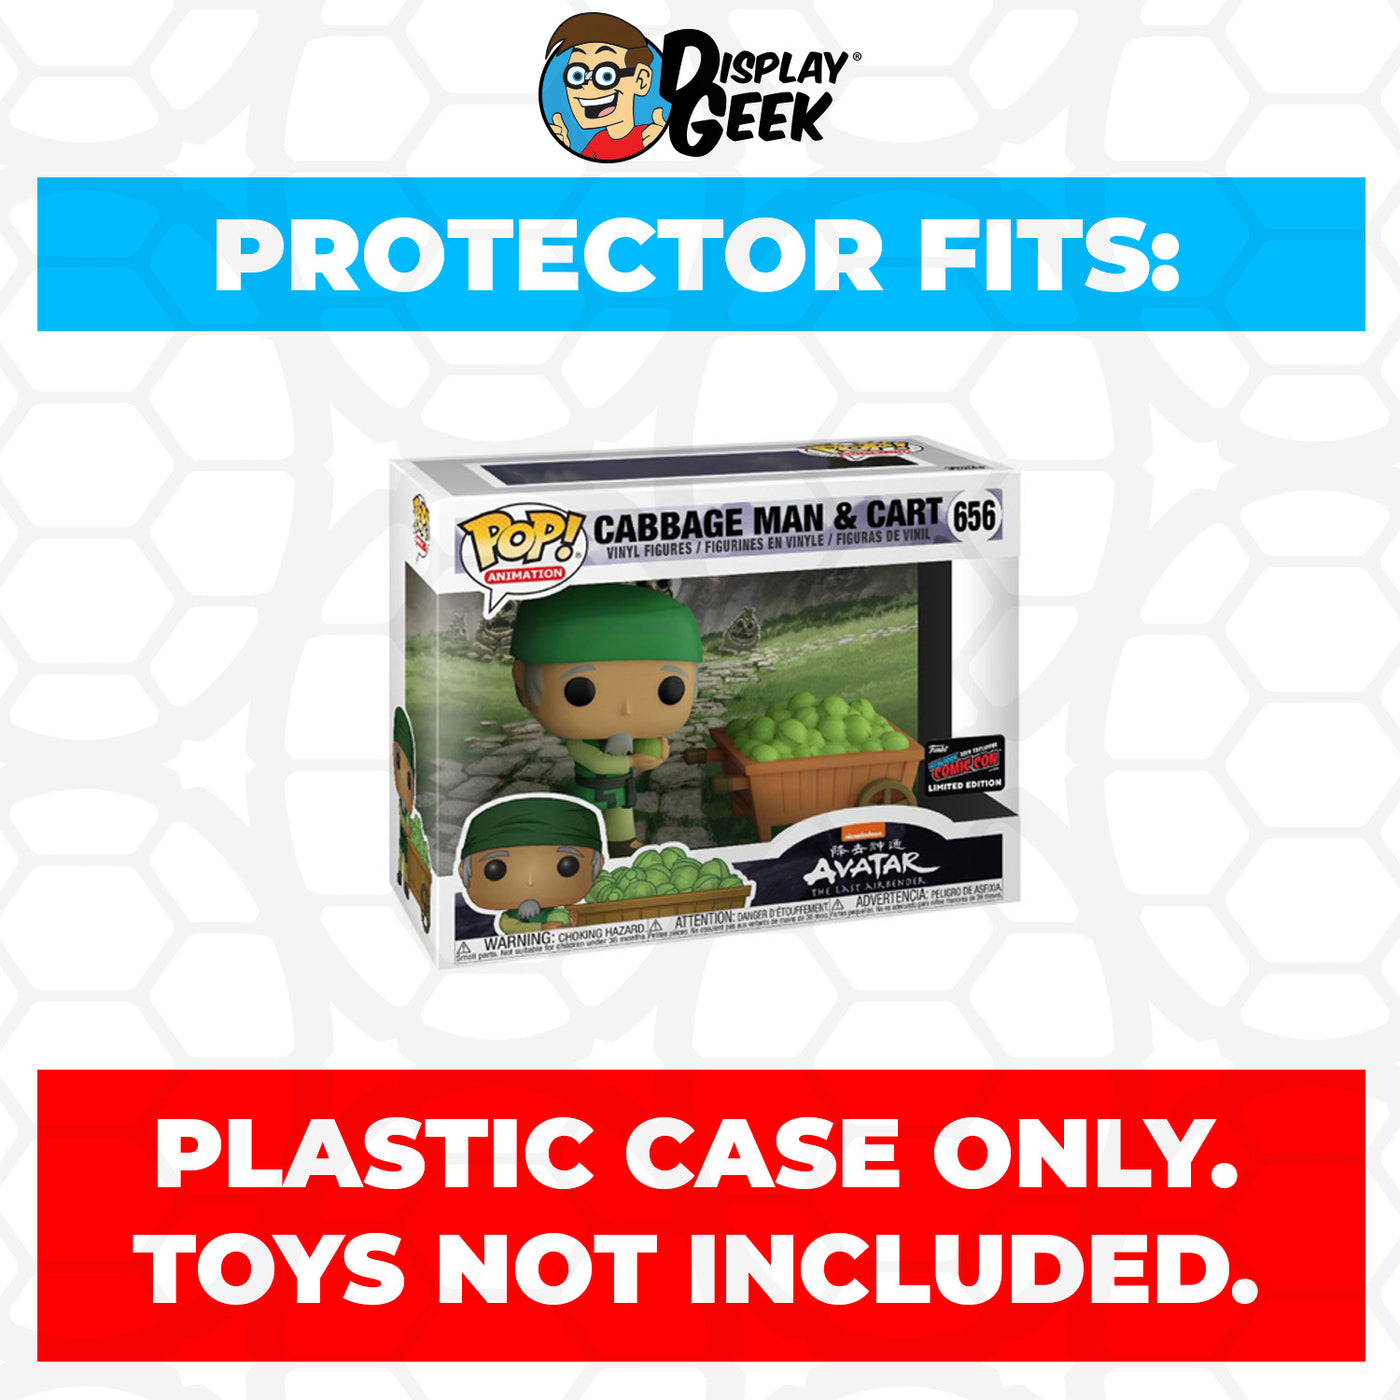 Pop Protector for 2 Pack Cabbage Man NYCC Funko Pop on The Protector Guide App by Display Geek